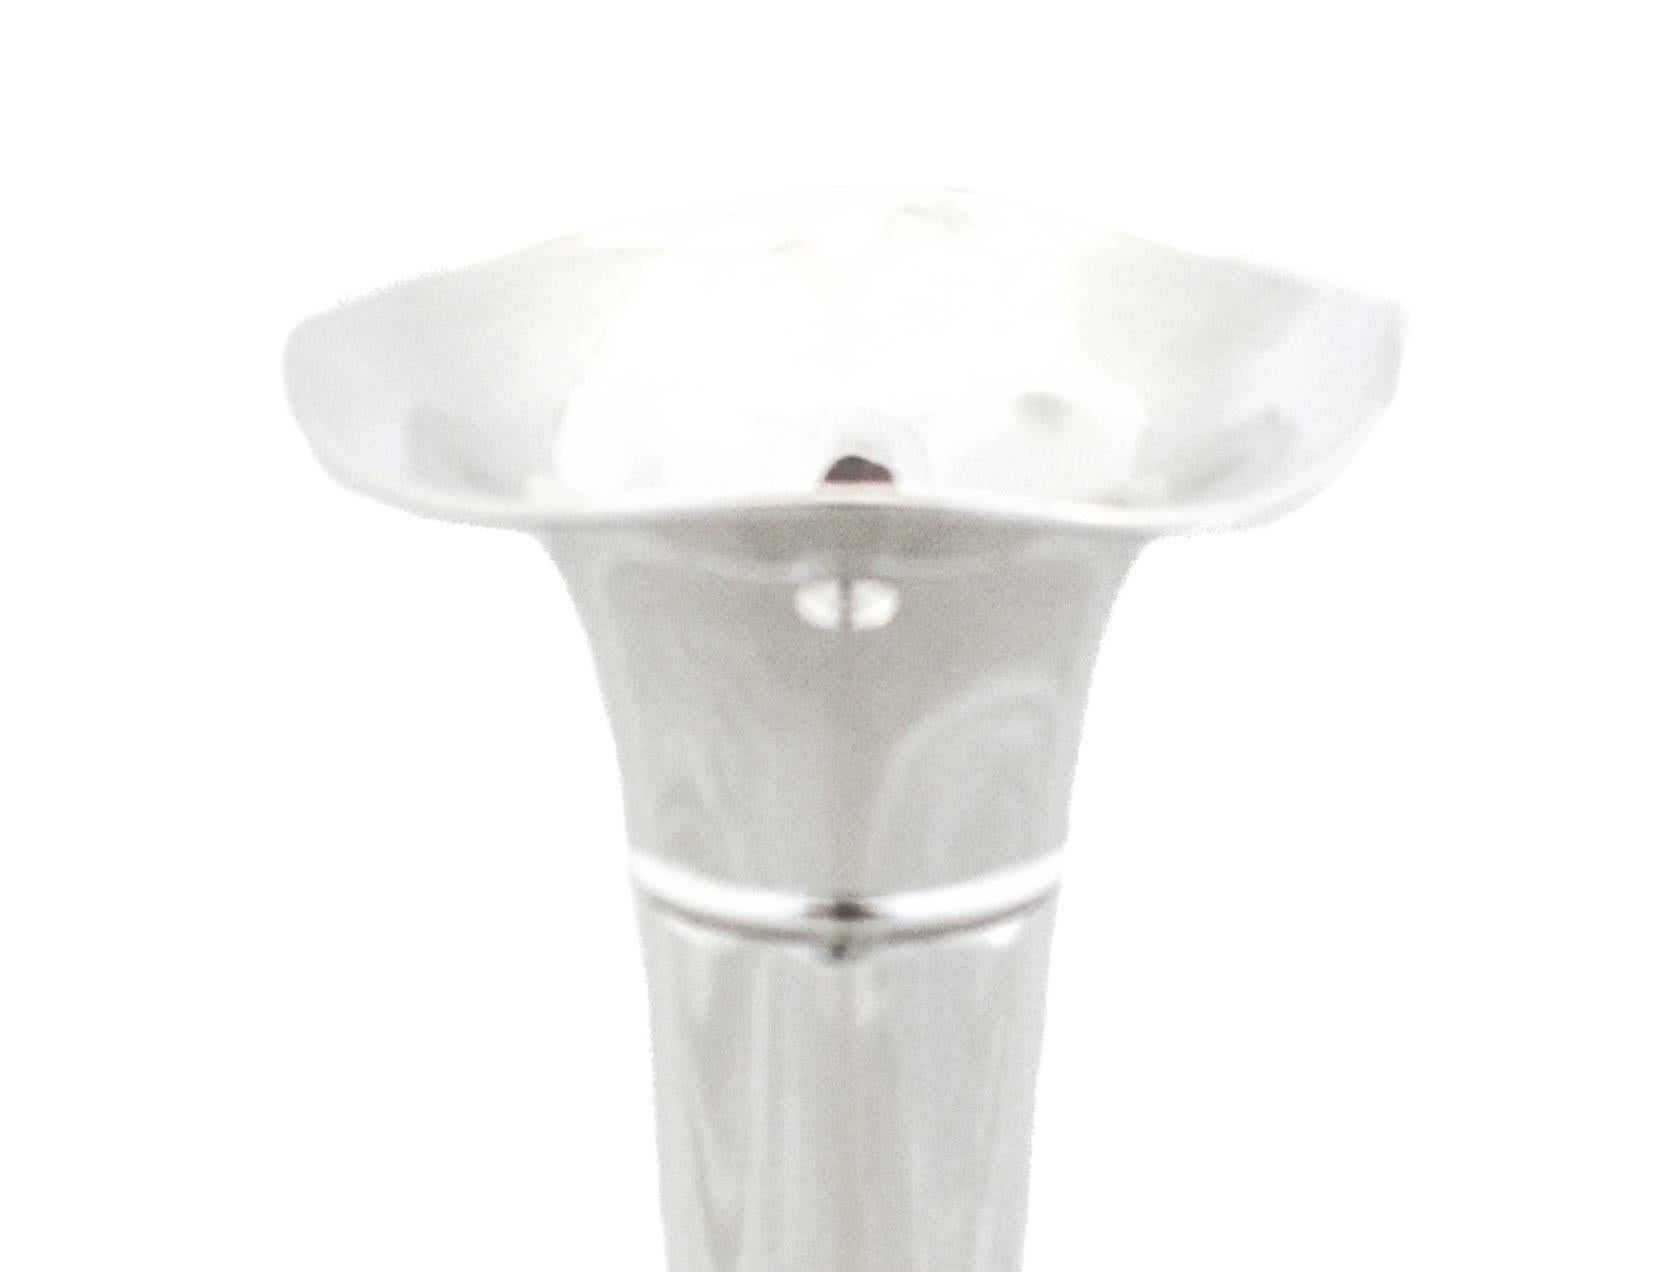 Being offered is a sterling silver bud vase by Shreve Crump & Low of San Francisco. It is a clean and modern piece with no etchings or decorative design. Just a scalloped rim and a hand engraved “H” in script. This is the perfect size for a powder